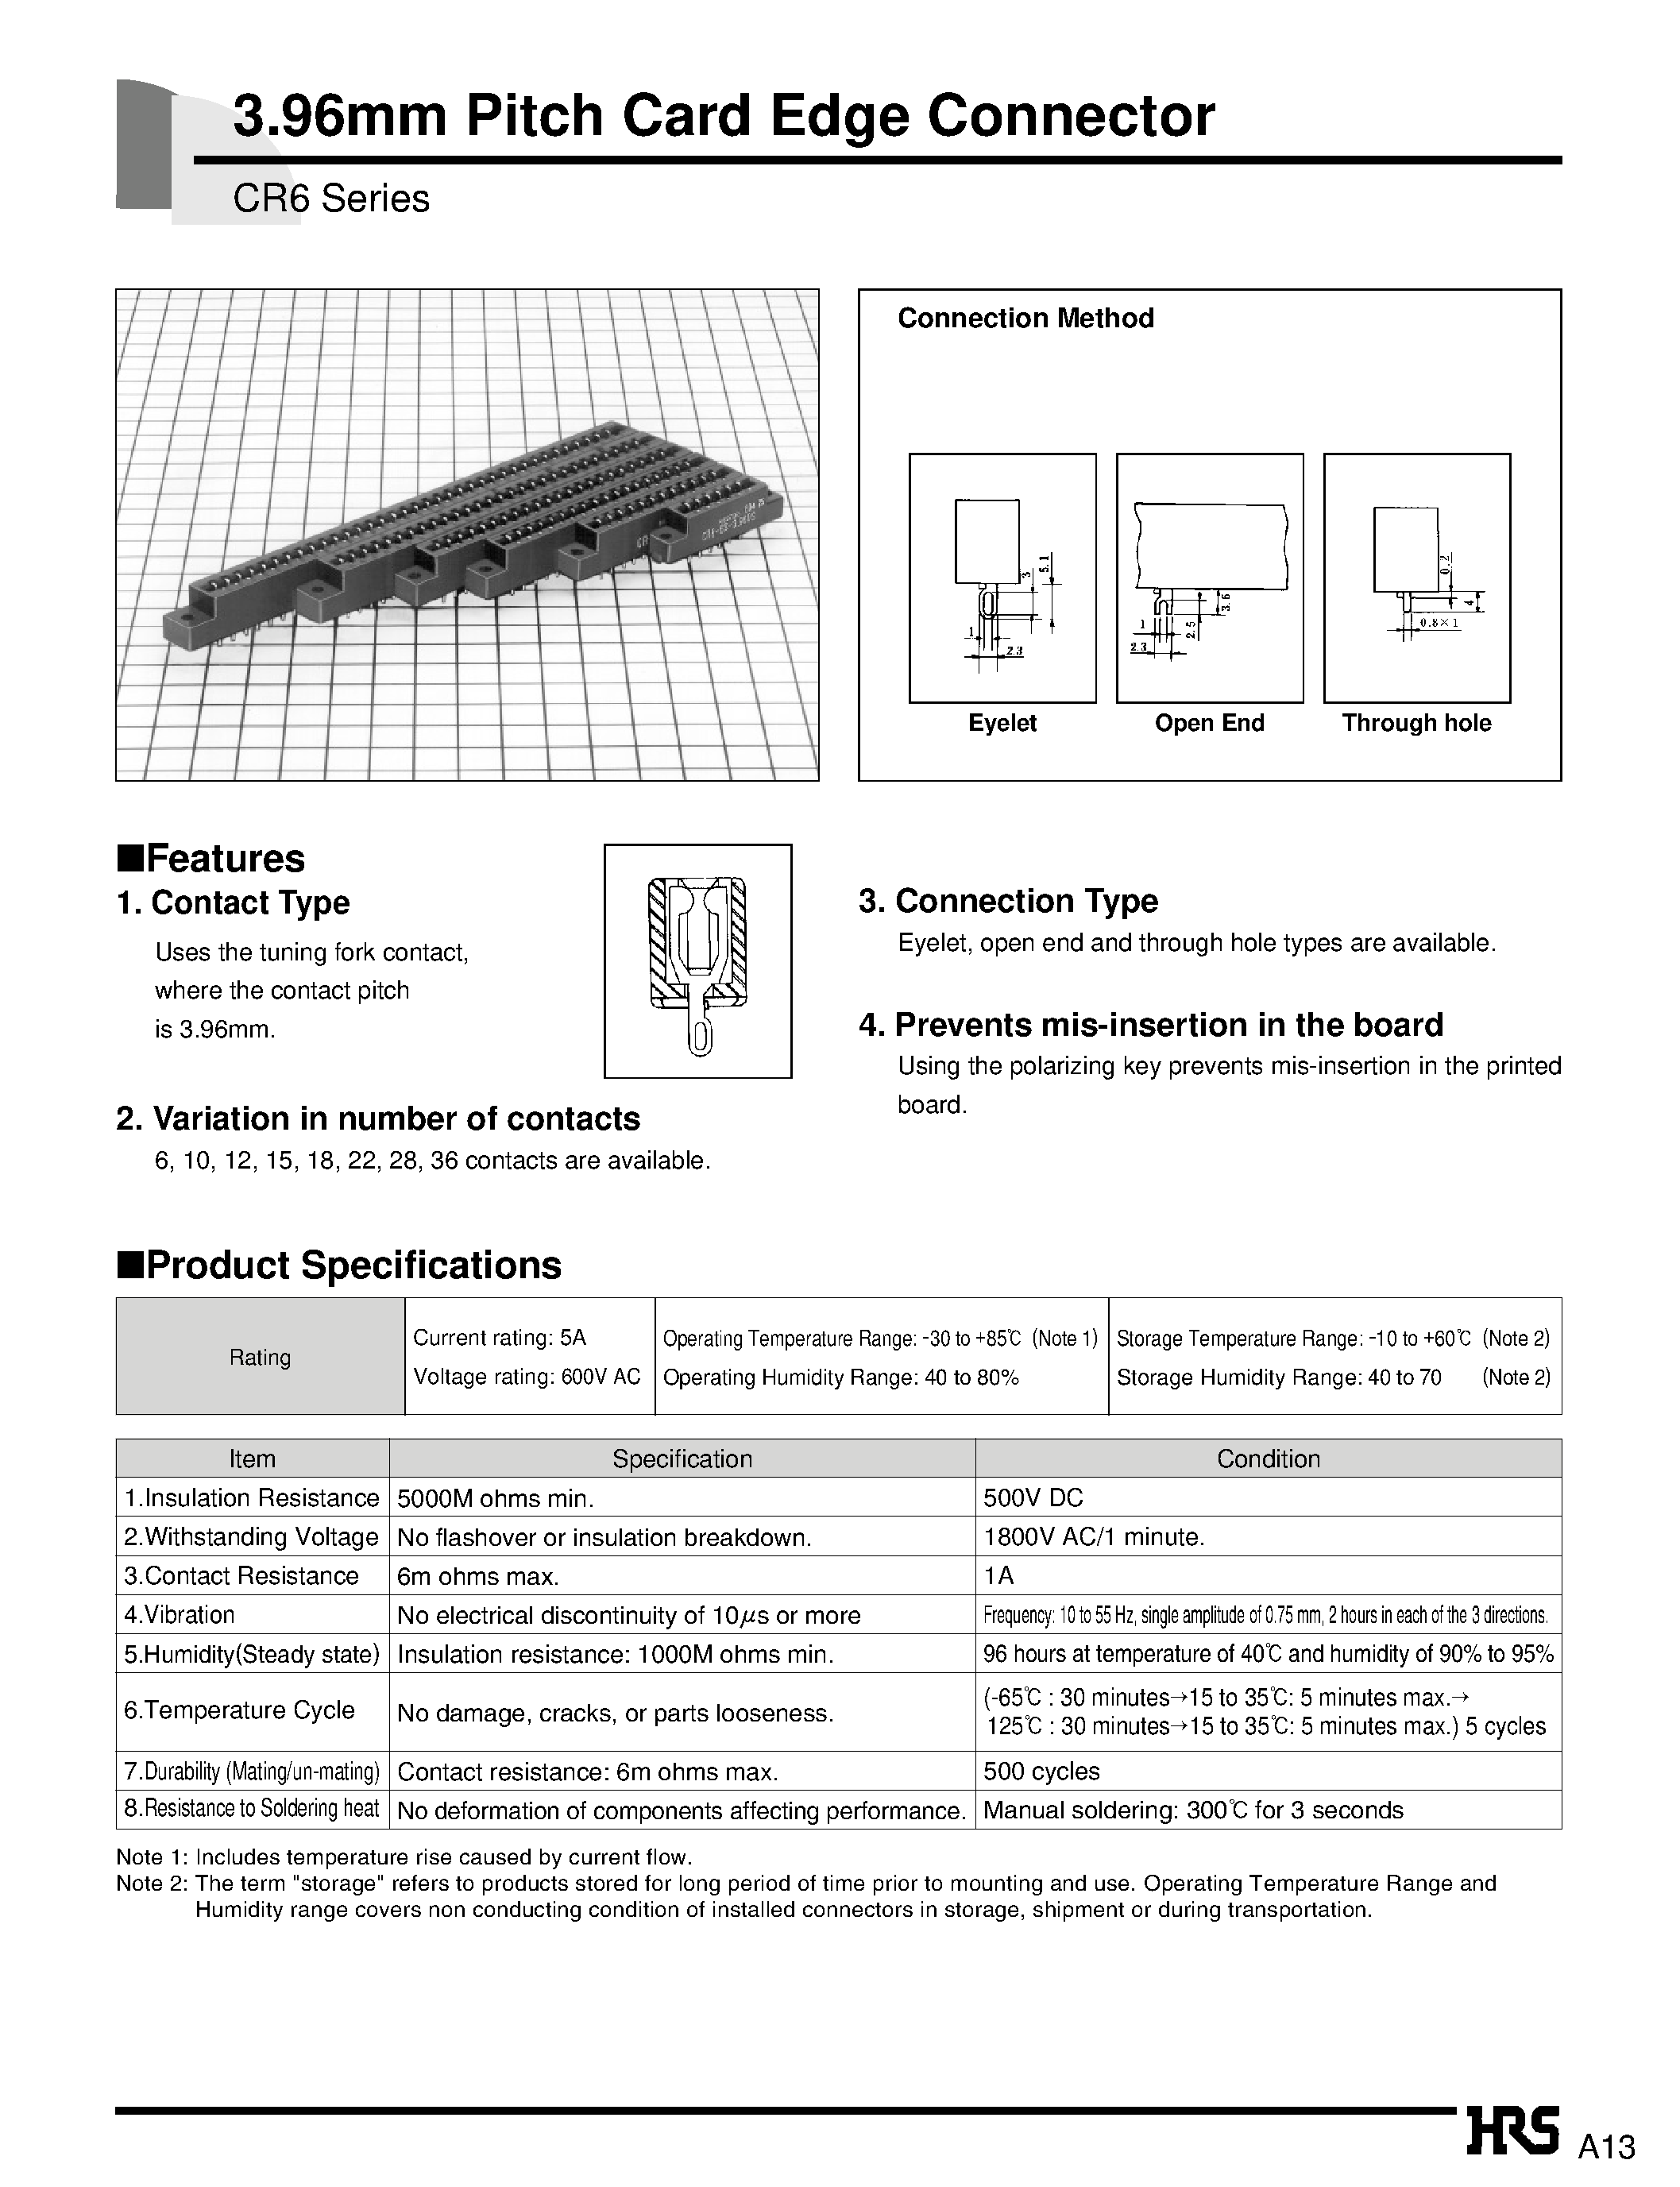 Datasheet CR6-28S-3.96OE - 3.96mm Pitch Card Edge Connector page 1